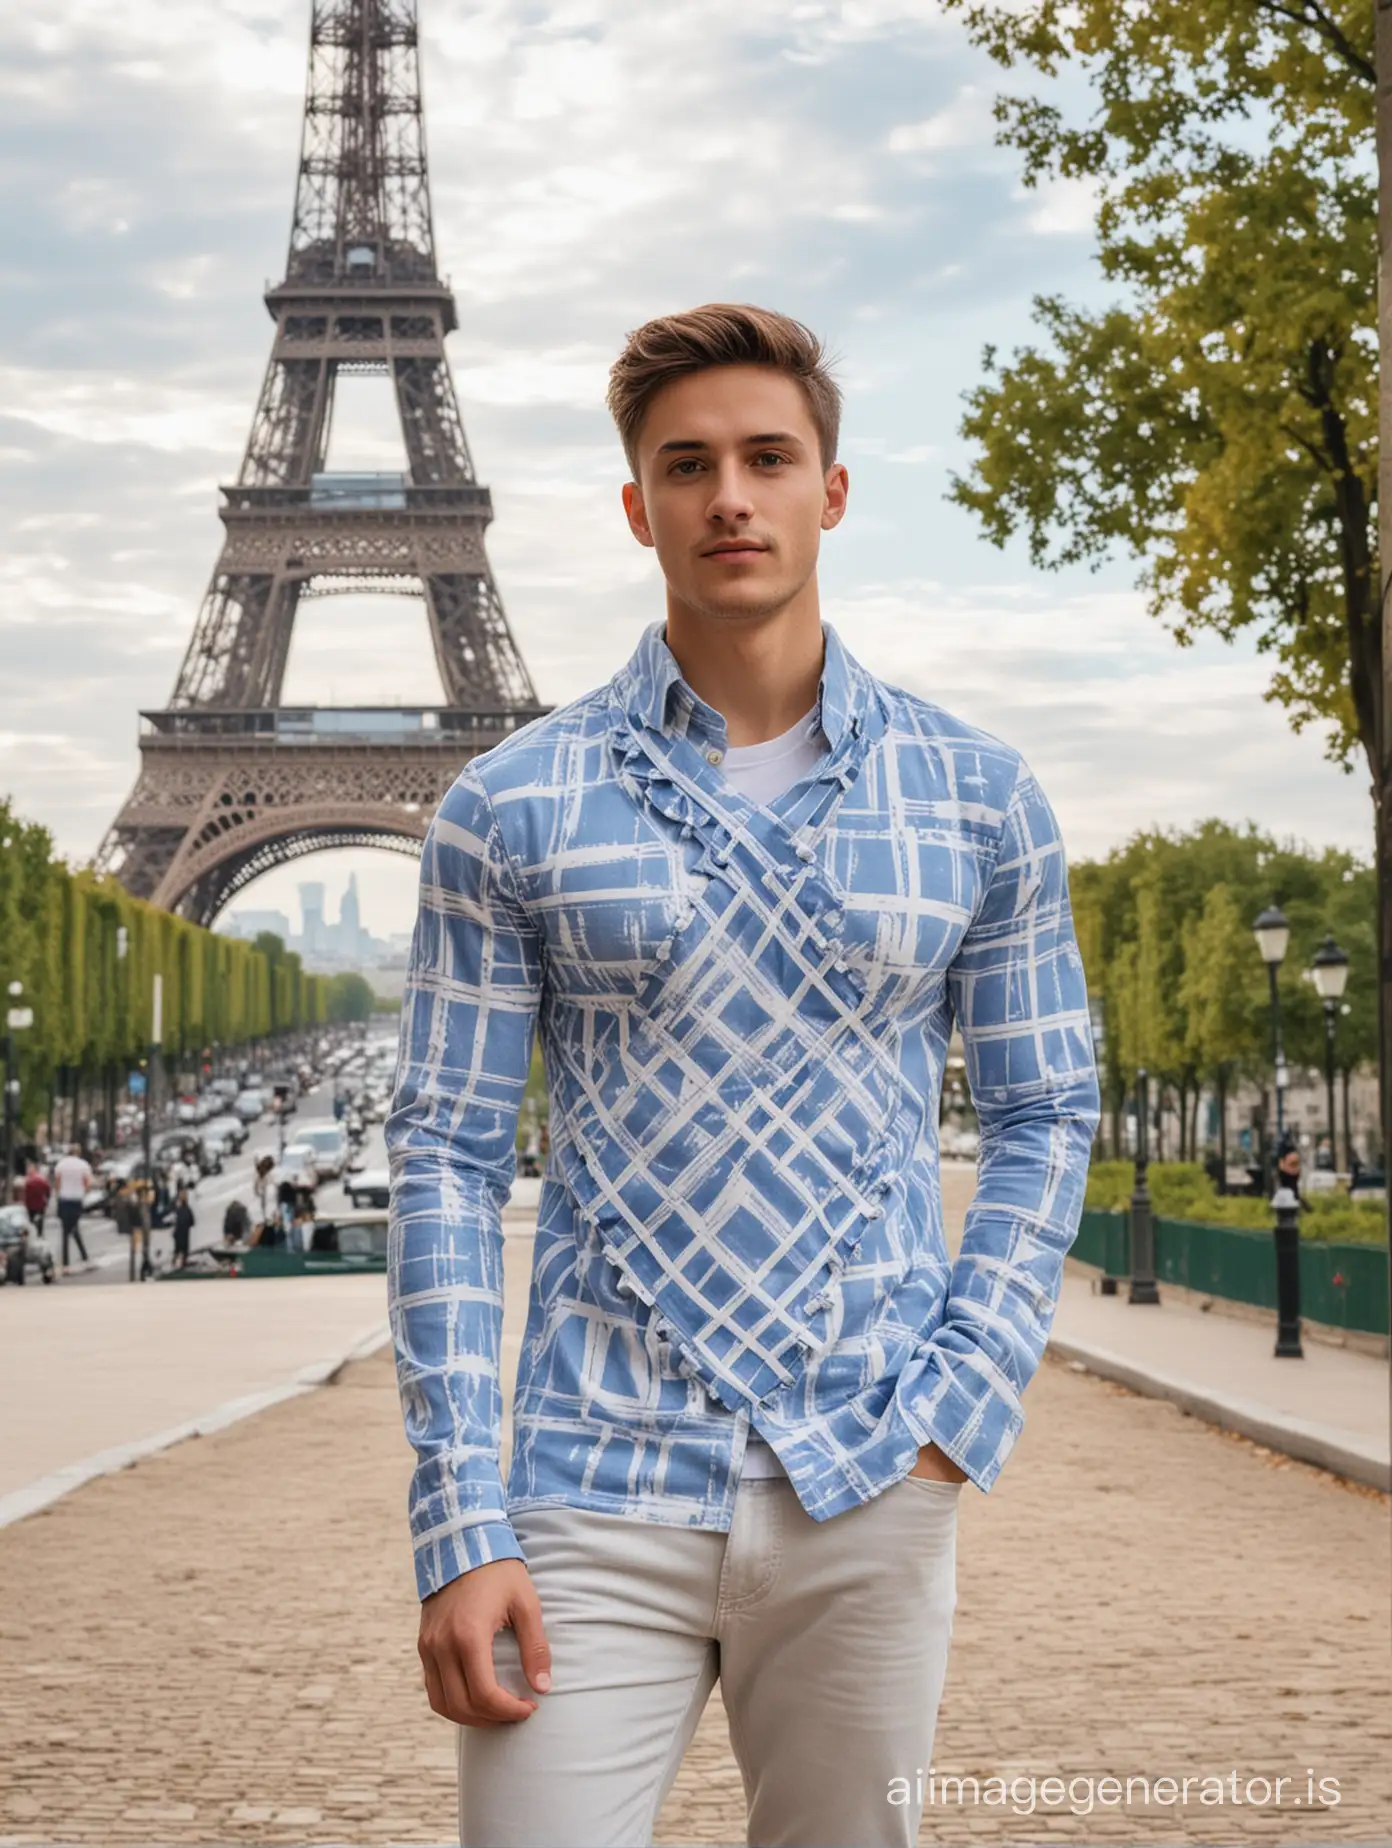 Young-Man-in-Colorful-Striped-Shirt-Posing-with-Eiffel-Tower